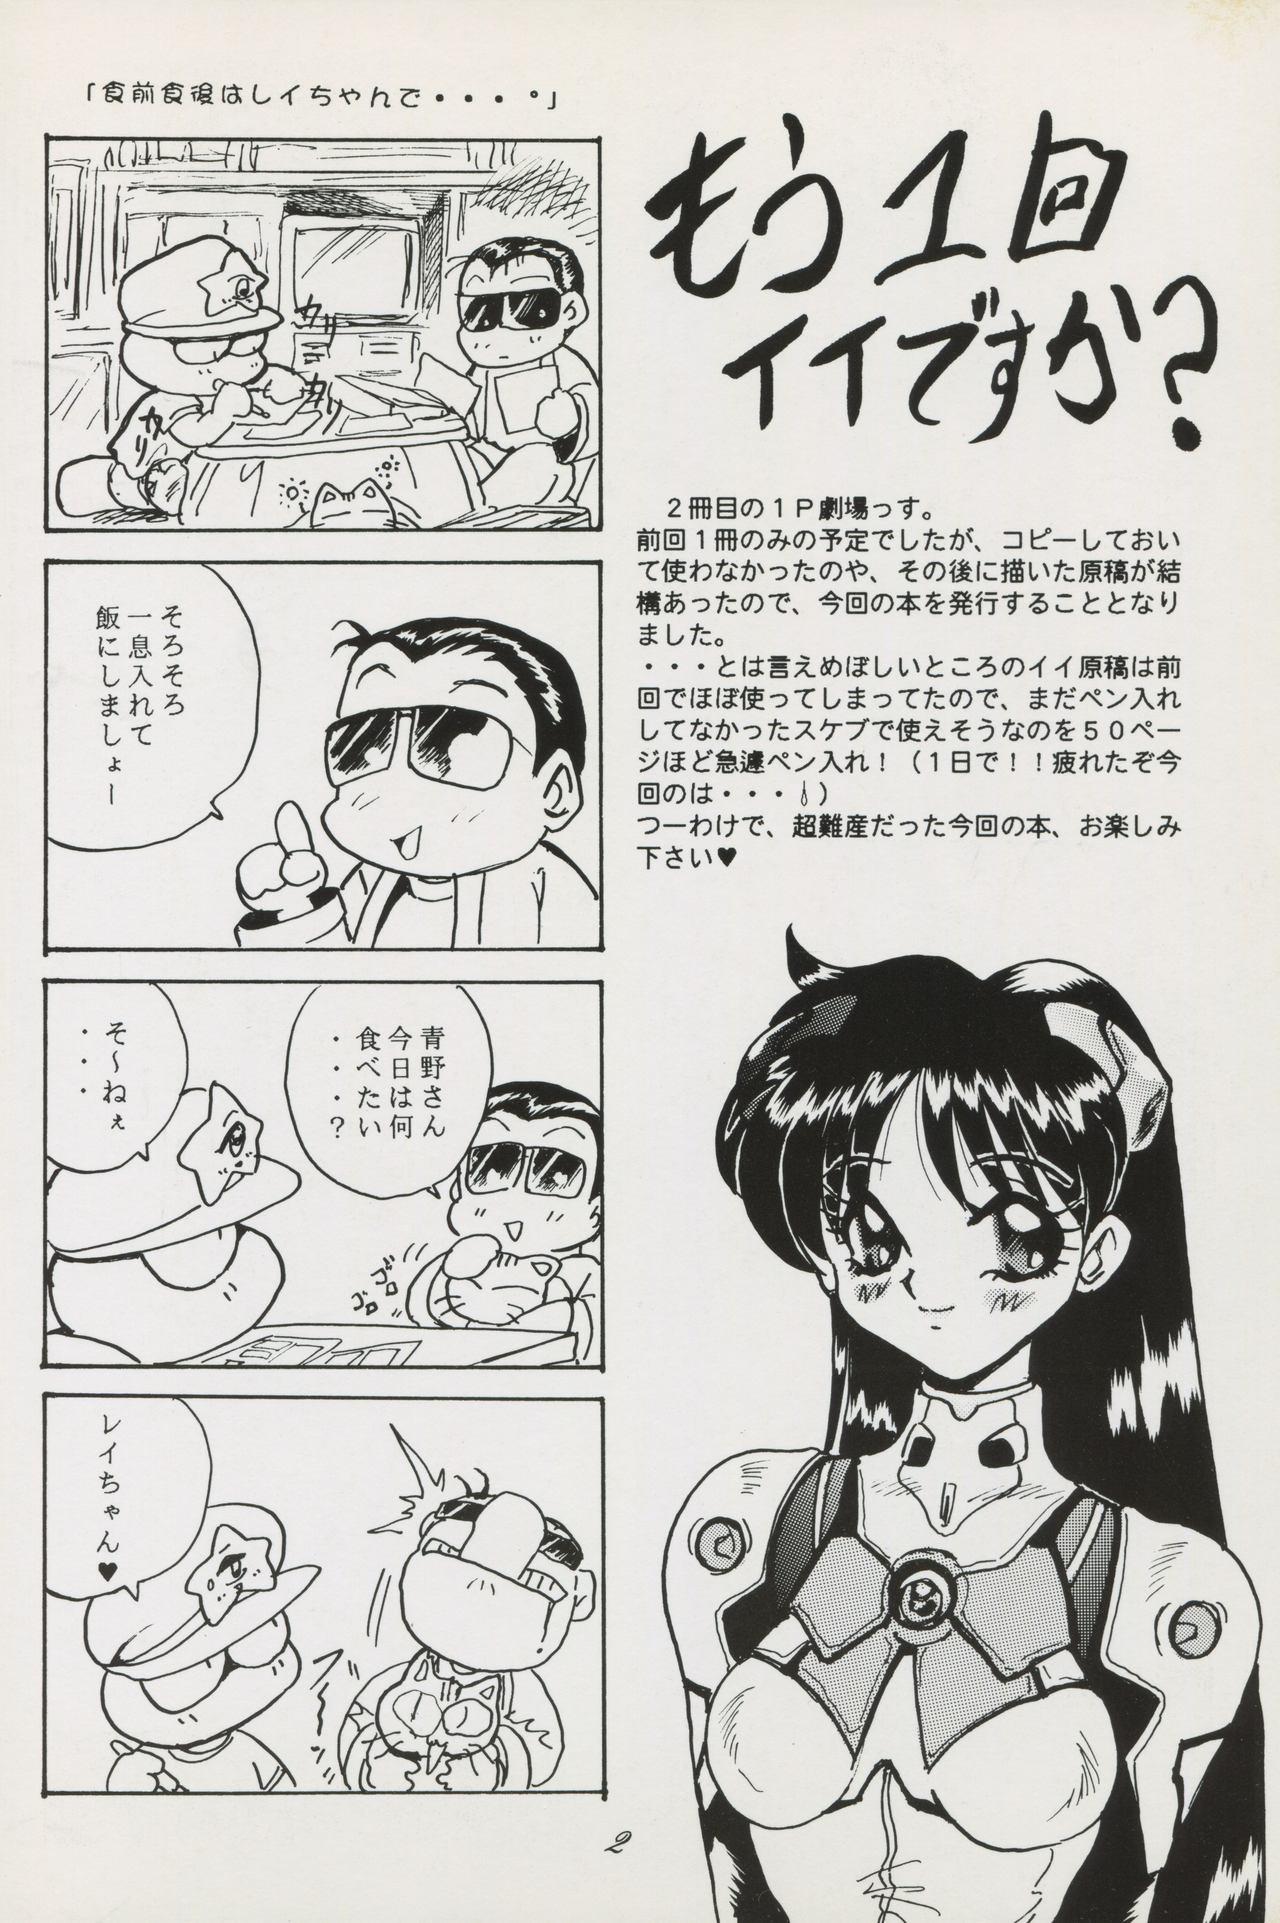 Eating Sailor Moon 1 Page Gekijou P2 - SAILOR MOON ONE PAGE THEATER II - Sailor moon Gaysex - Page 2